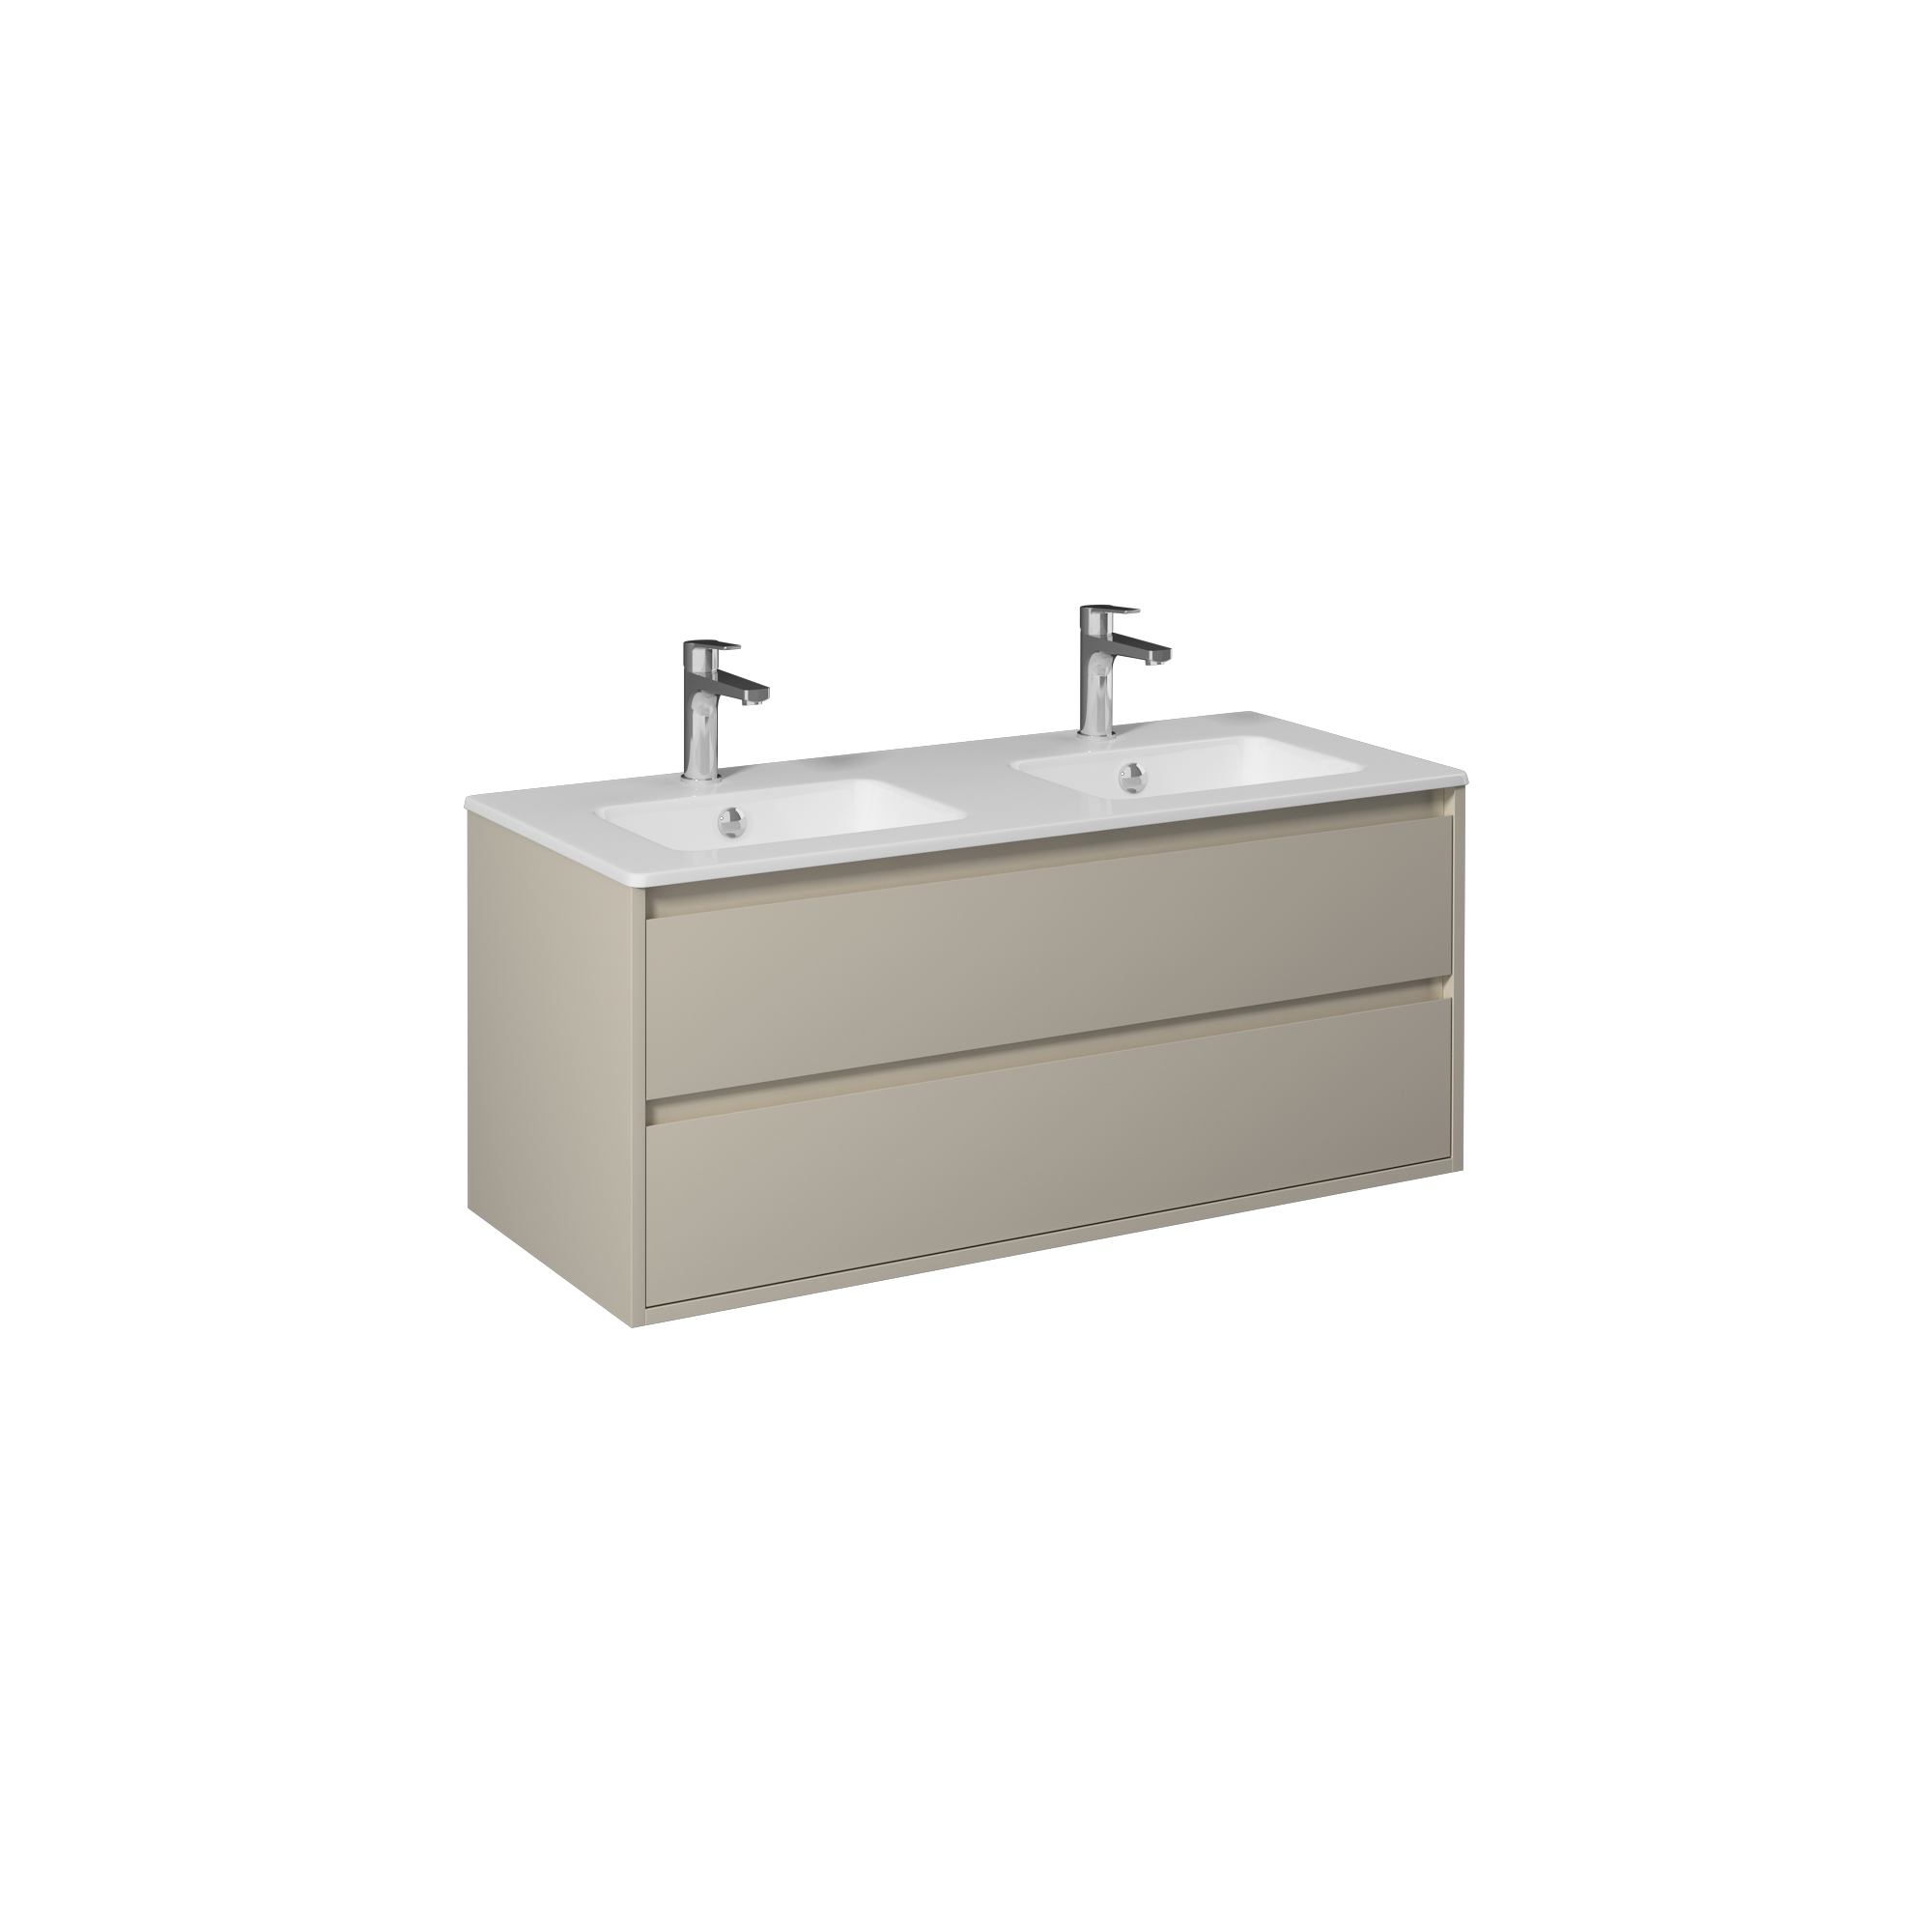 Pro Cabinet Washbasin Cabinet, Sand Beige Lacquer Double Drawer 47"